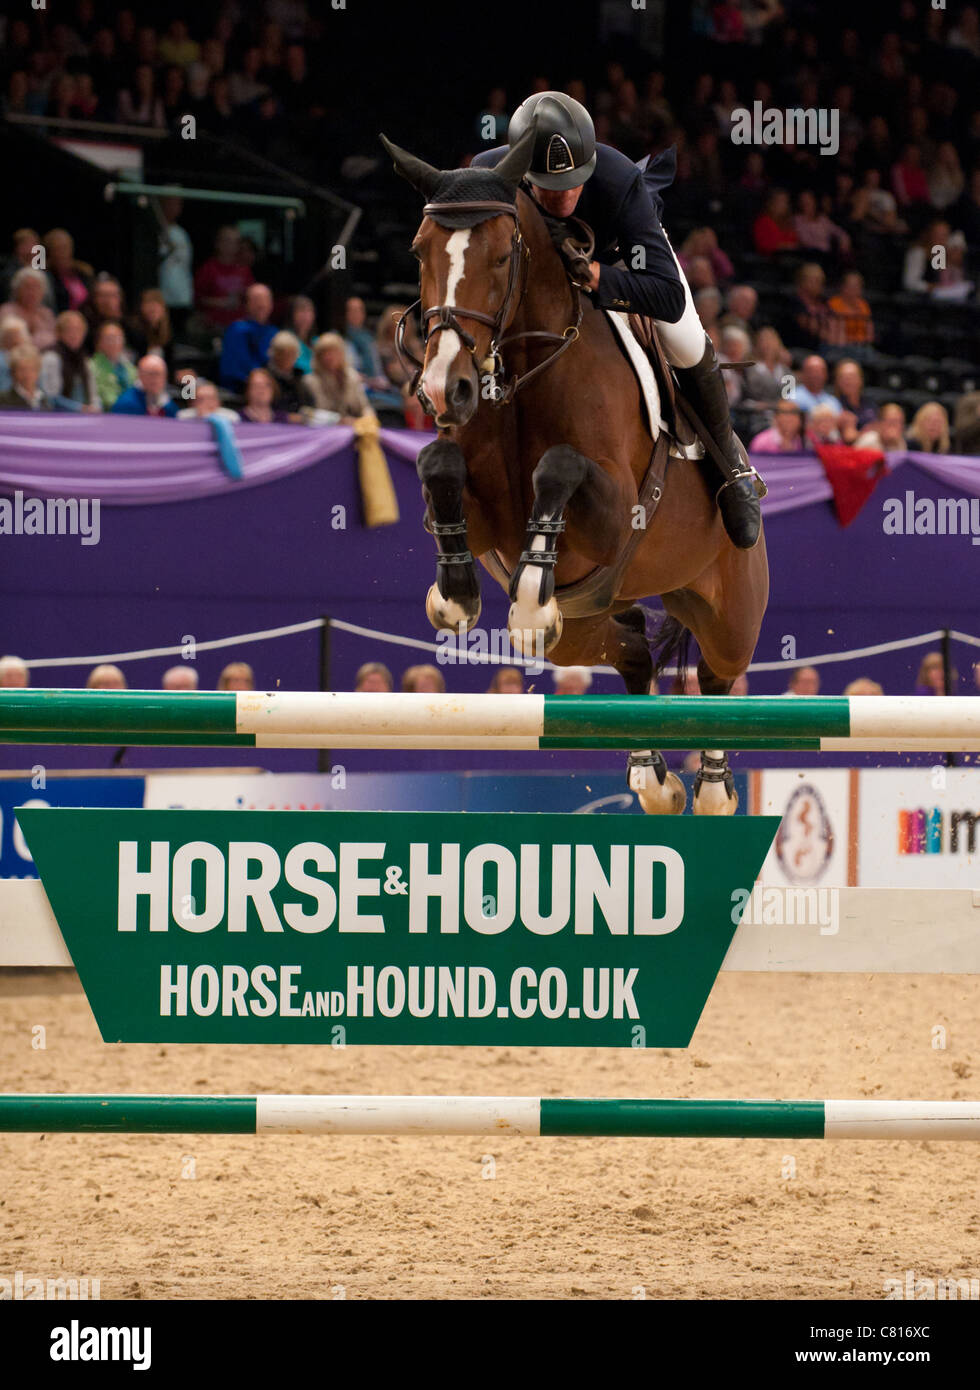 Guy Williams and Djakarta clear the last during the jump-off to win the Horse & Hound Foxhunter Championship 2011 Stock Photo